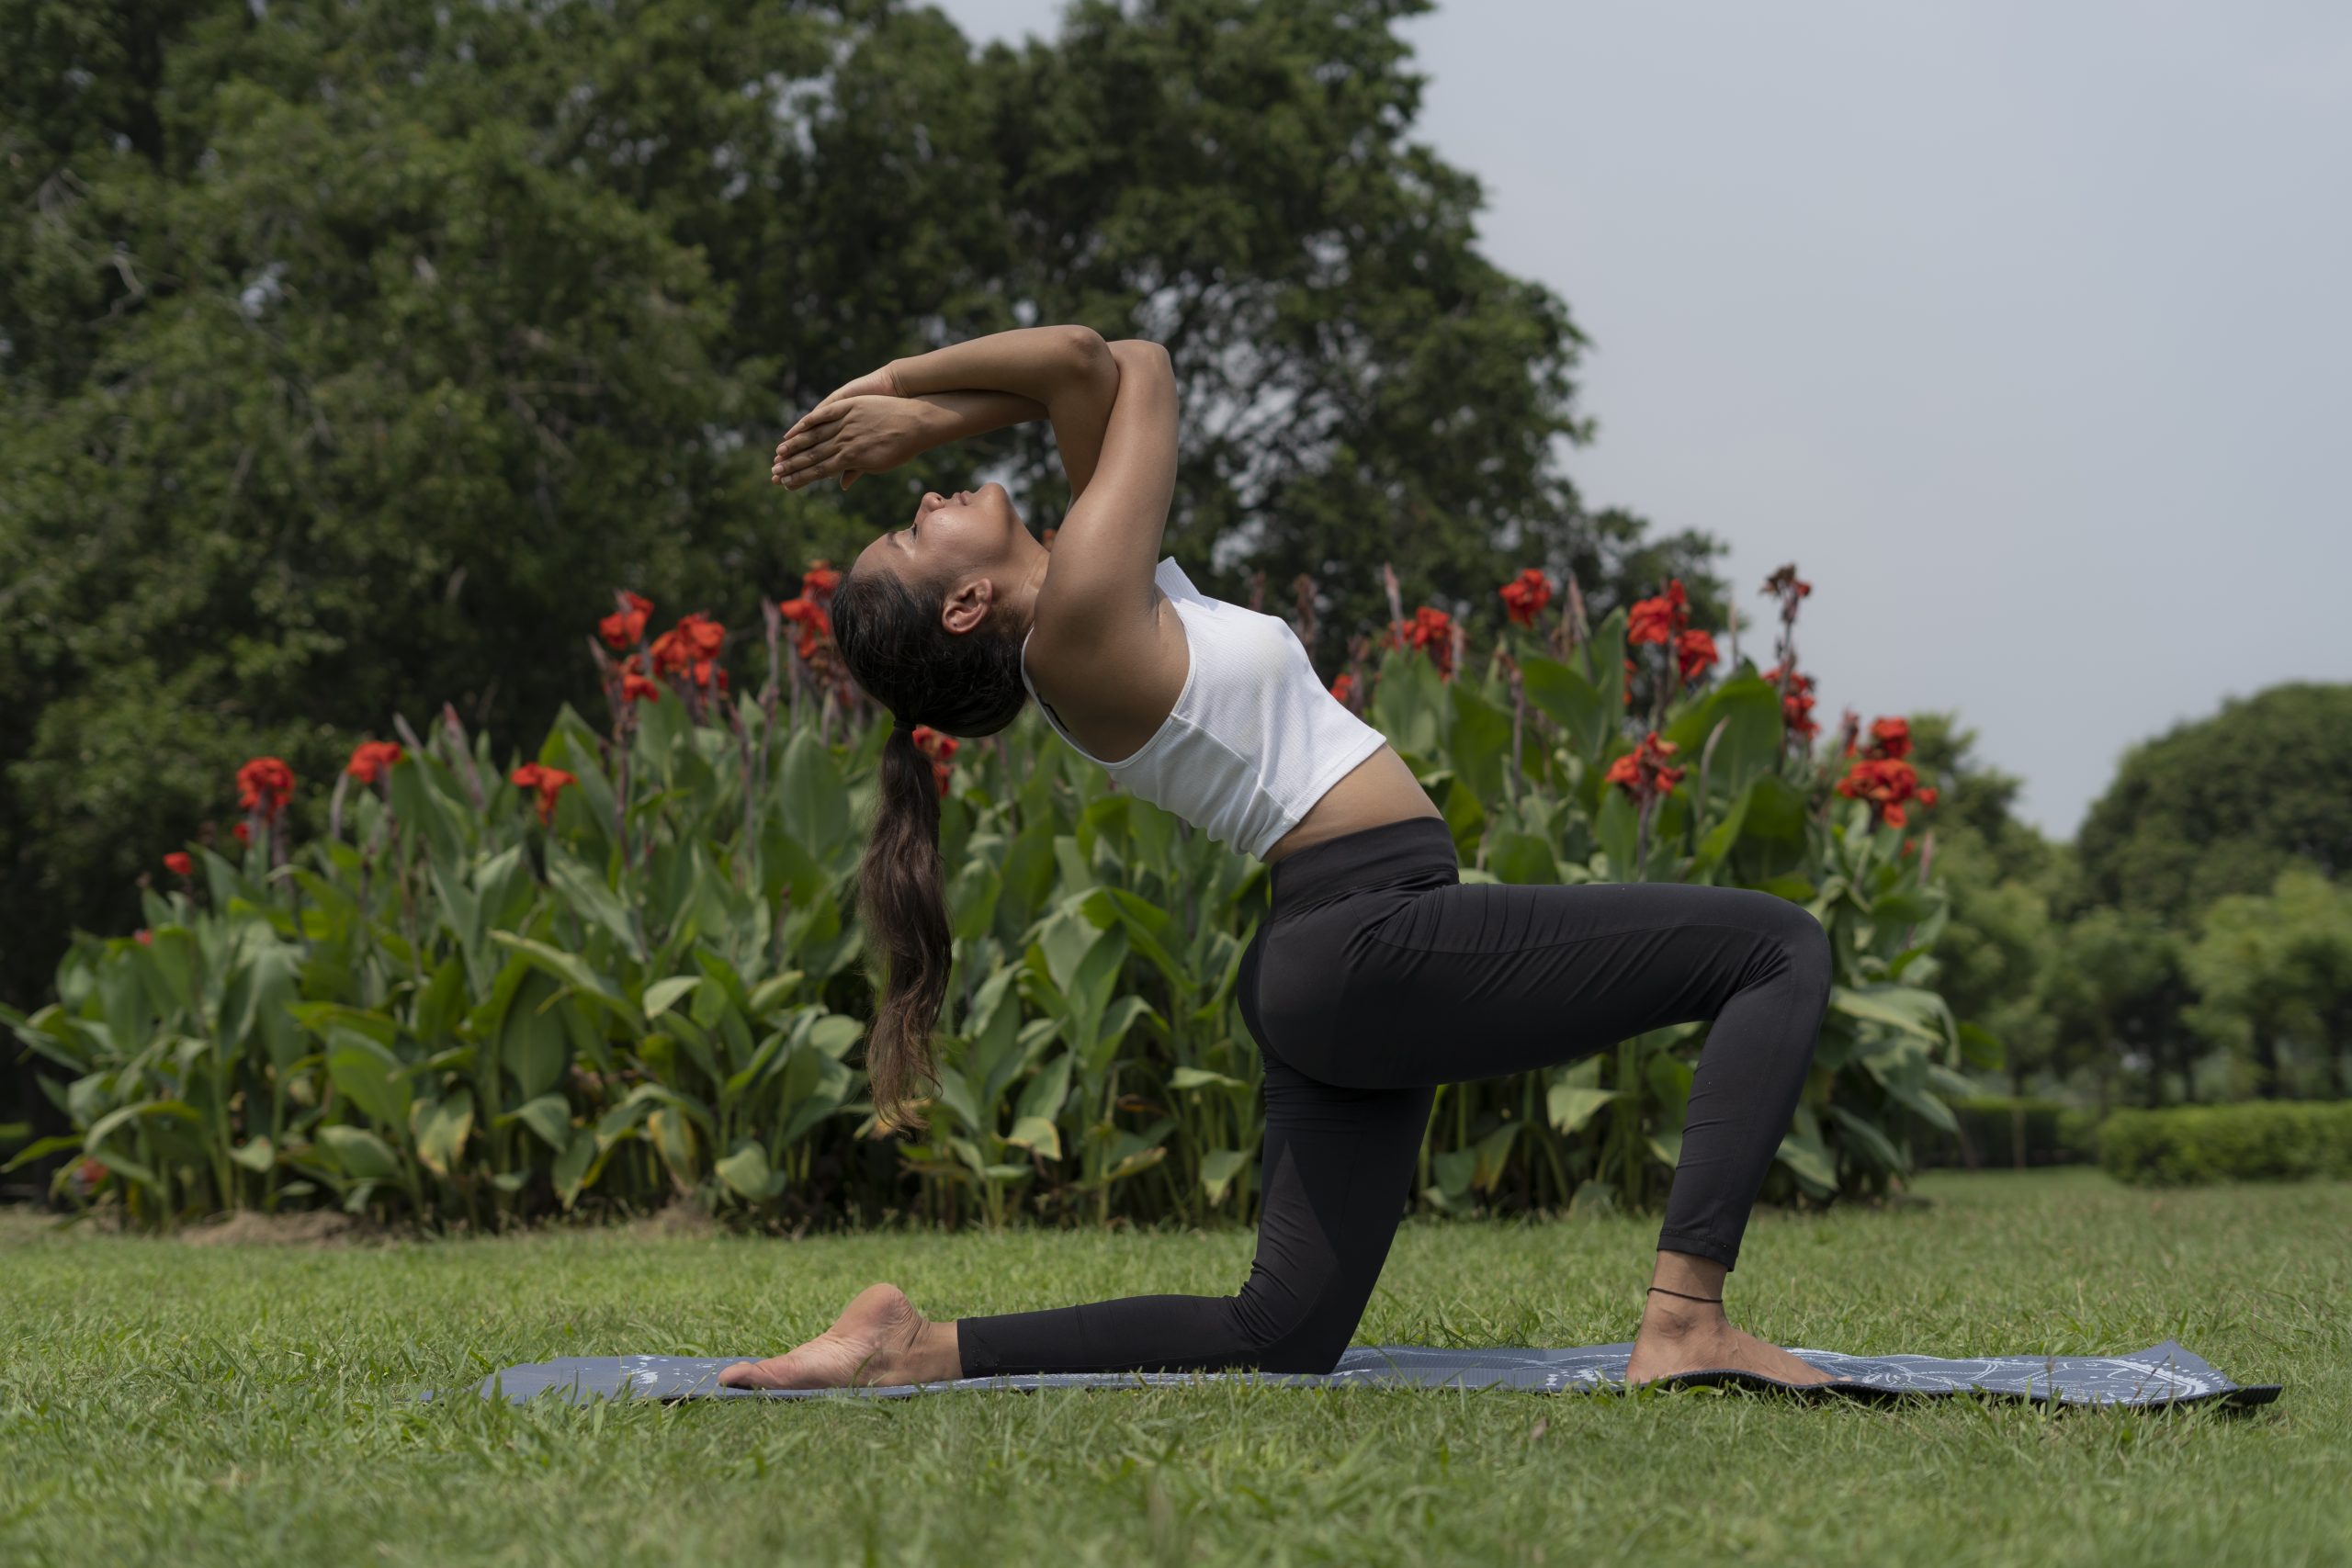 A girl doing yoga in a park.